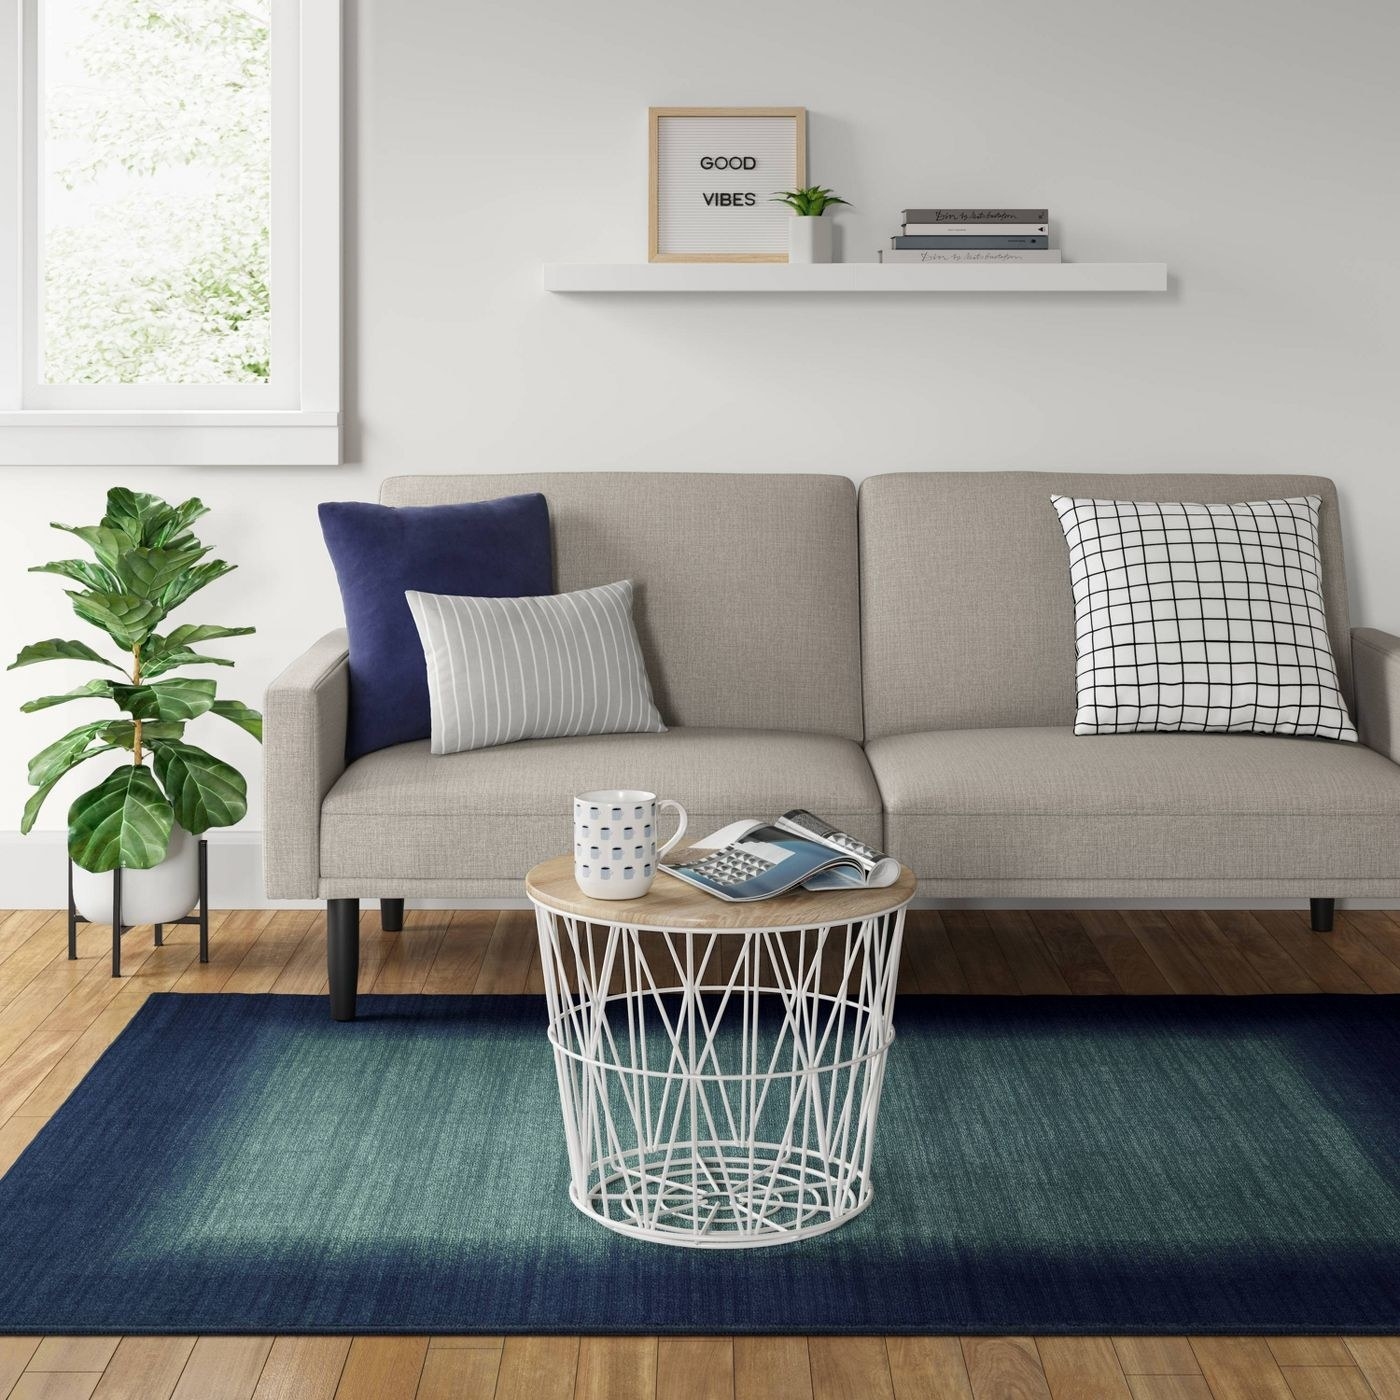 rectangular blue and green ombre area rug in front of a couch